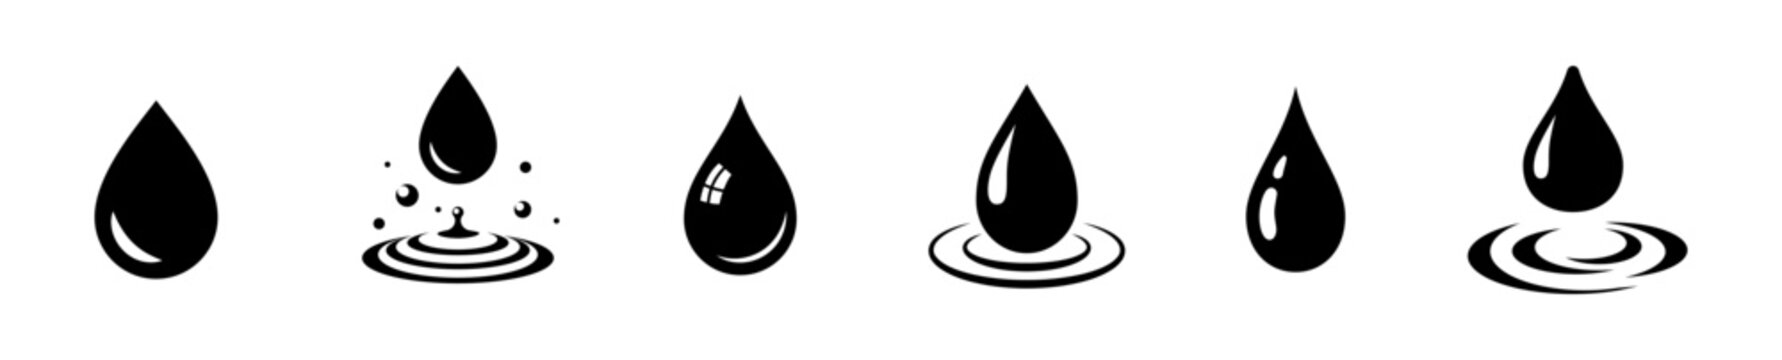 Water drop icon set. Flat droplet logo shapes collection